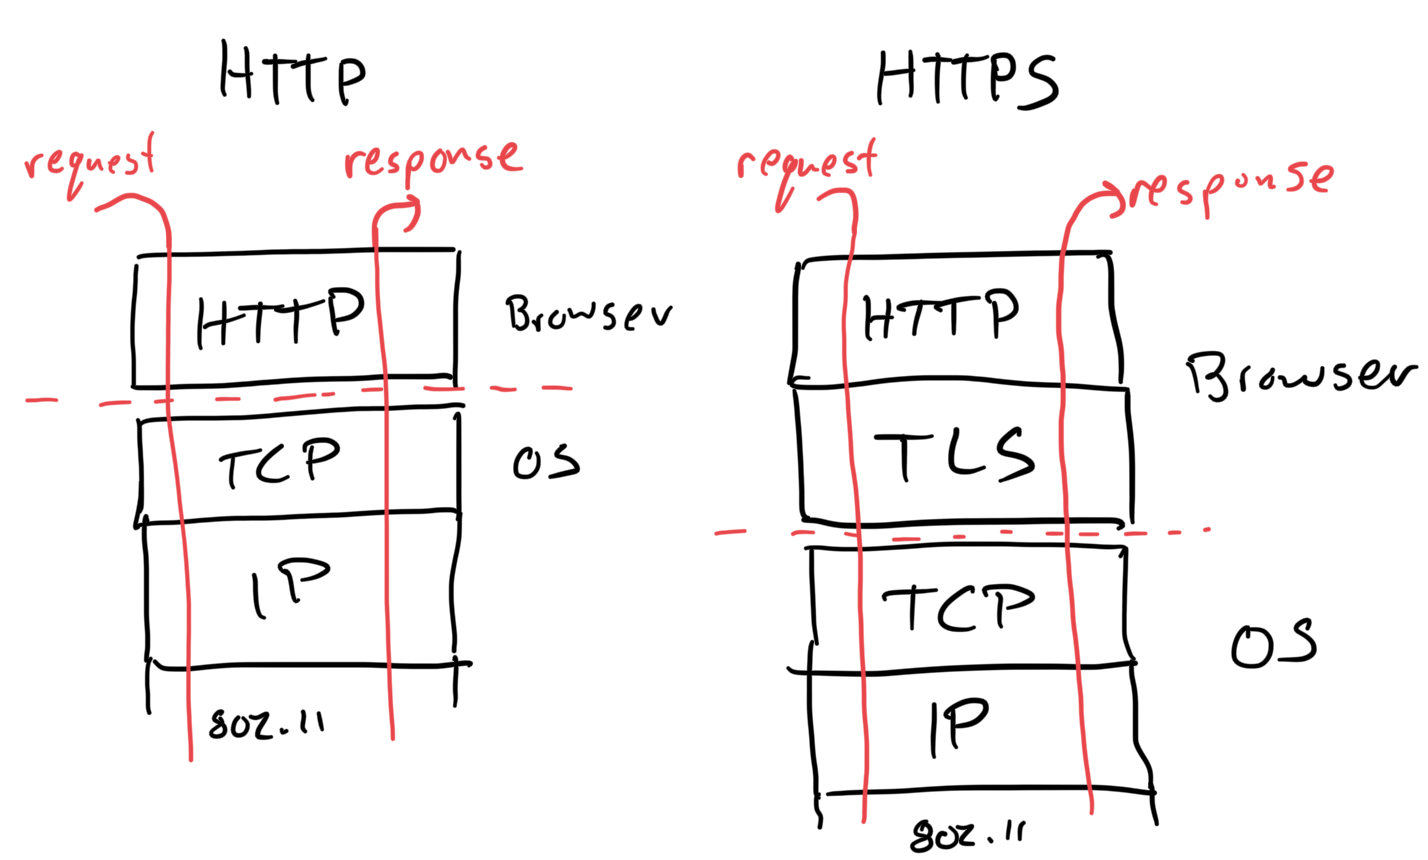 The difference between HTTP and HTTPS is the addition of a TLS layer.